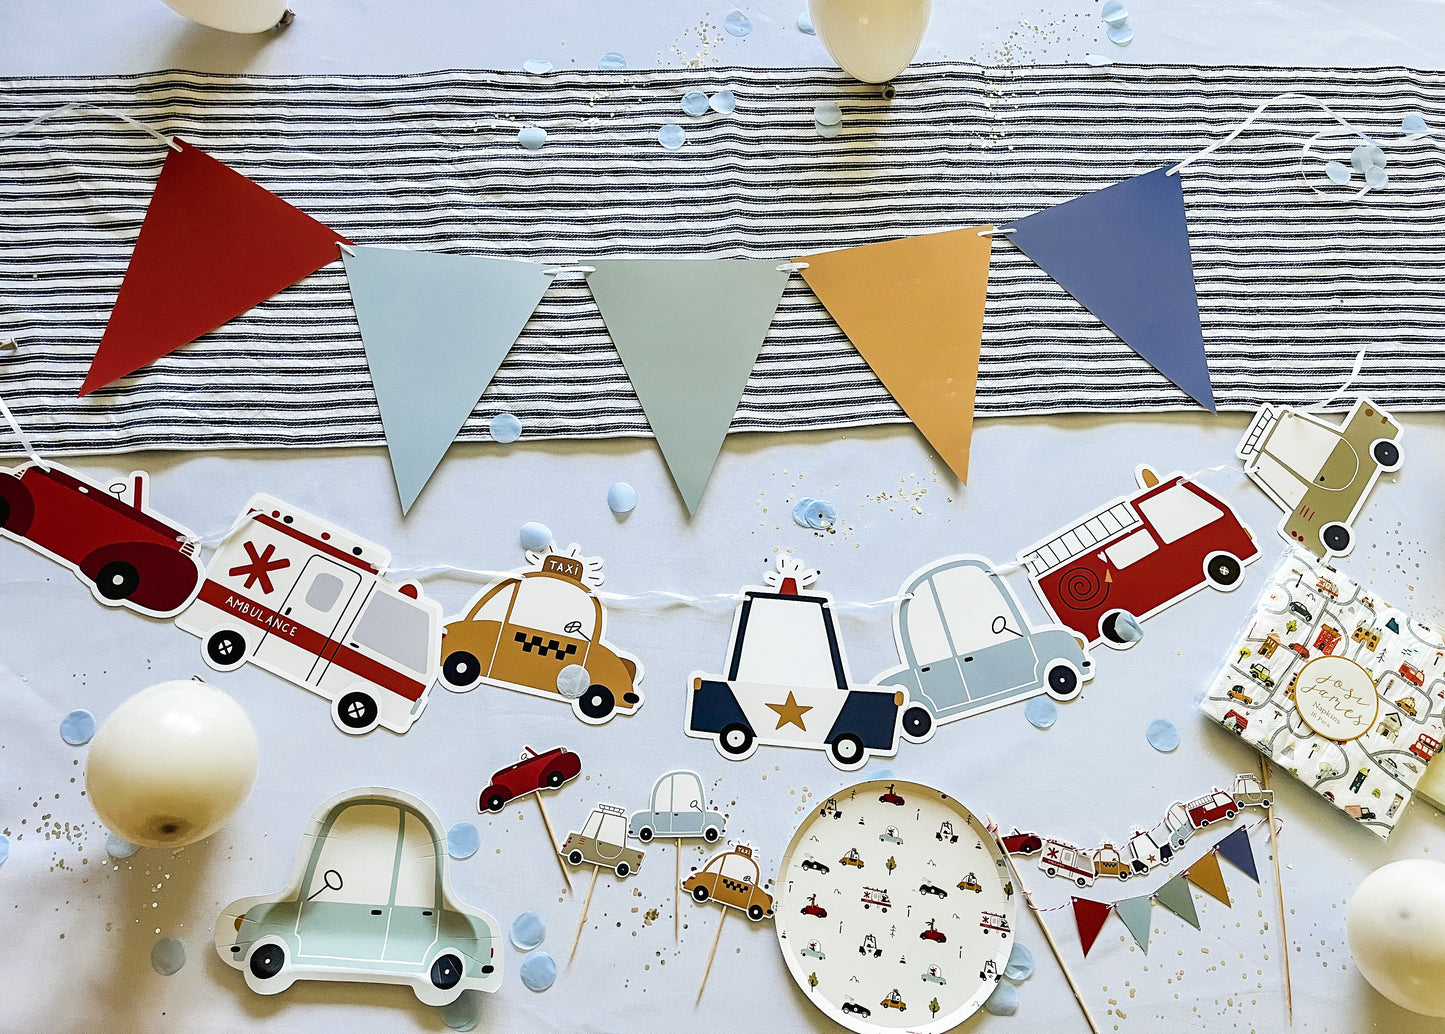 Car Cupcake Toppers